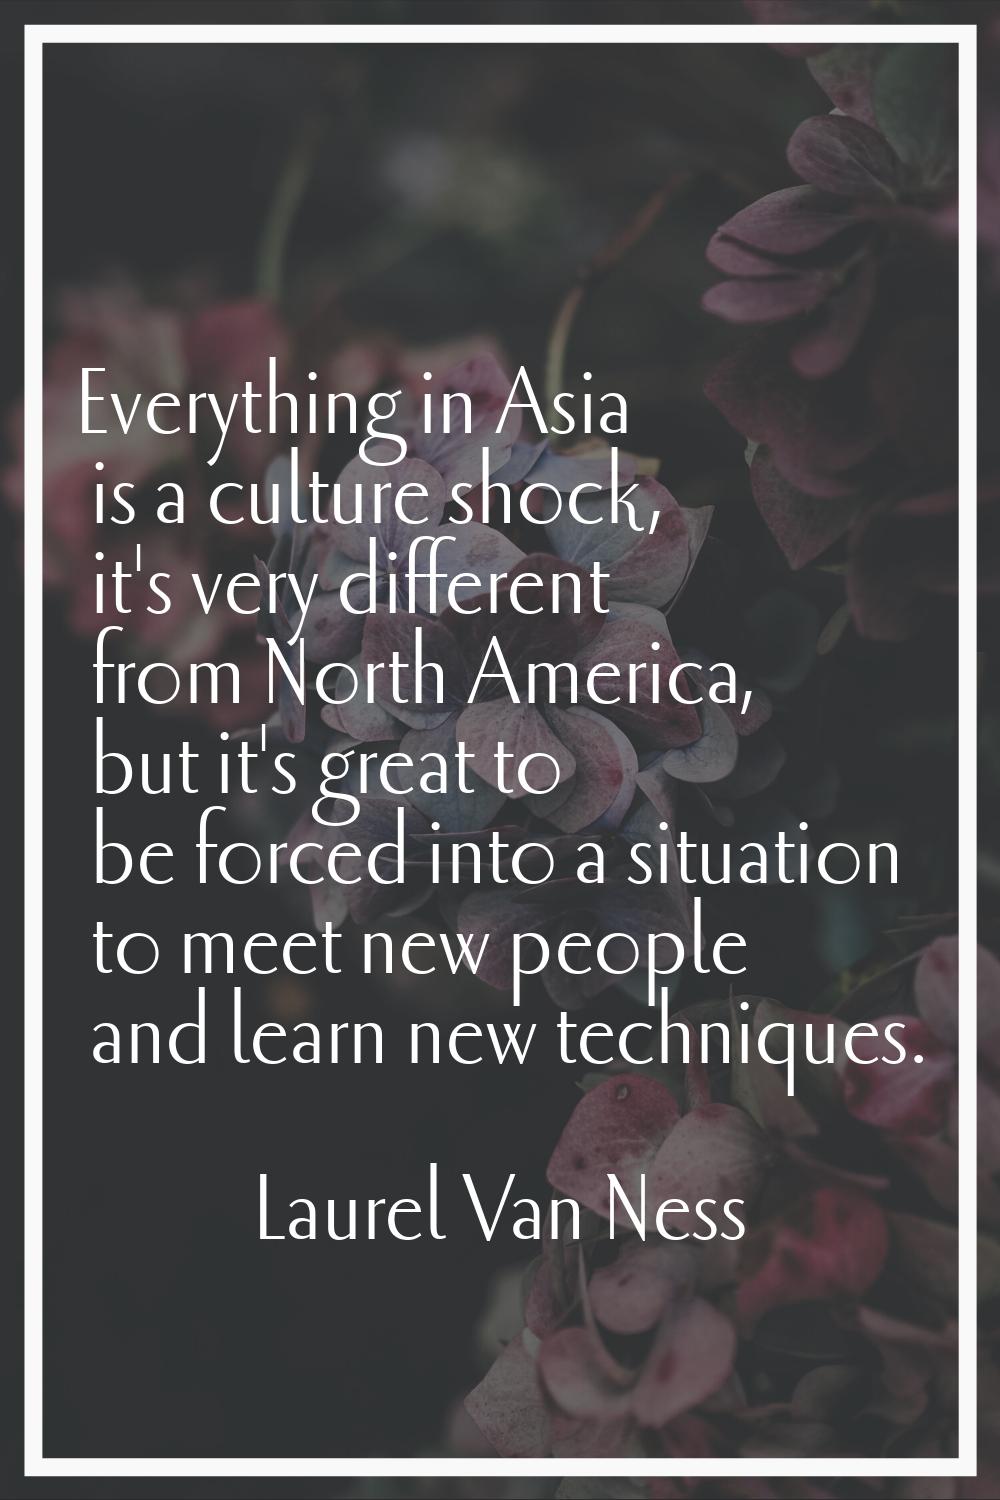 Everything in Asia is a culture shock, it's very different from North America, but it's great to be